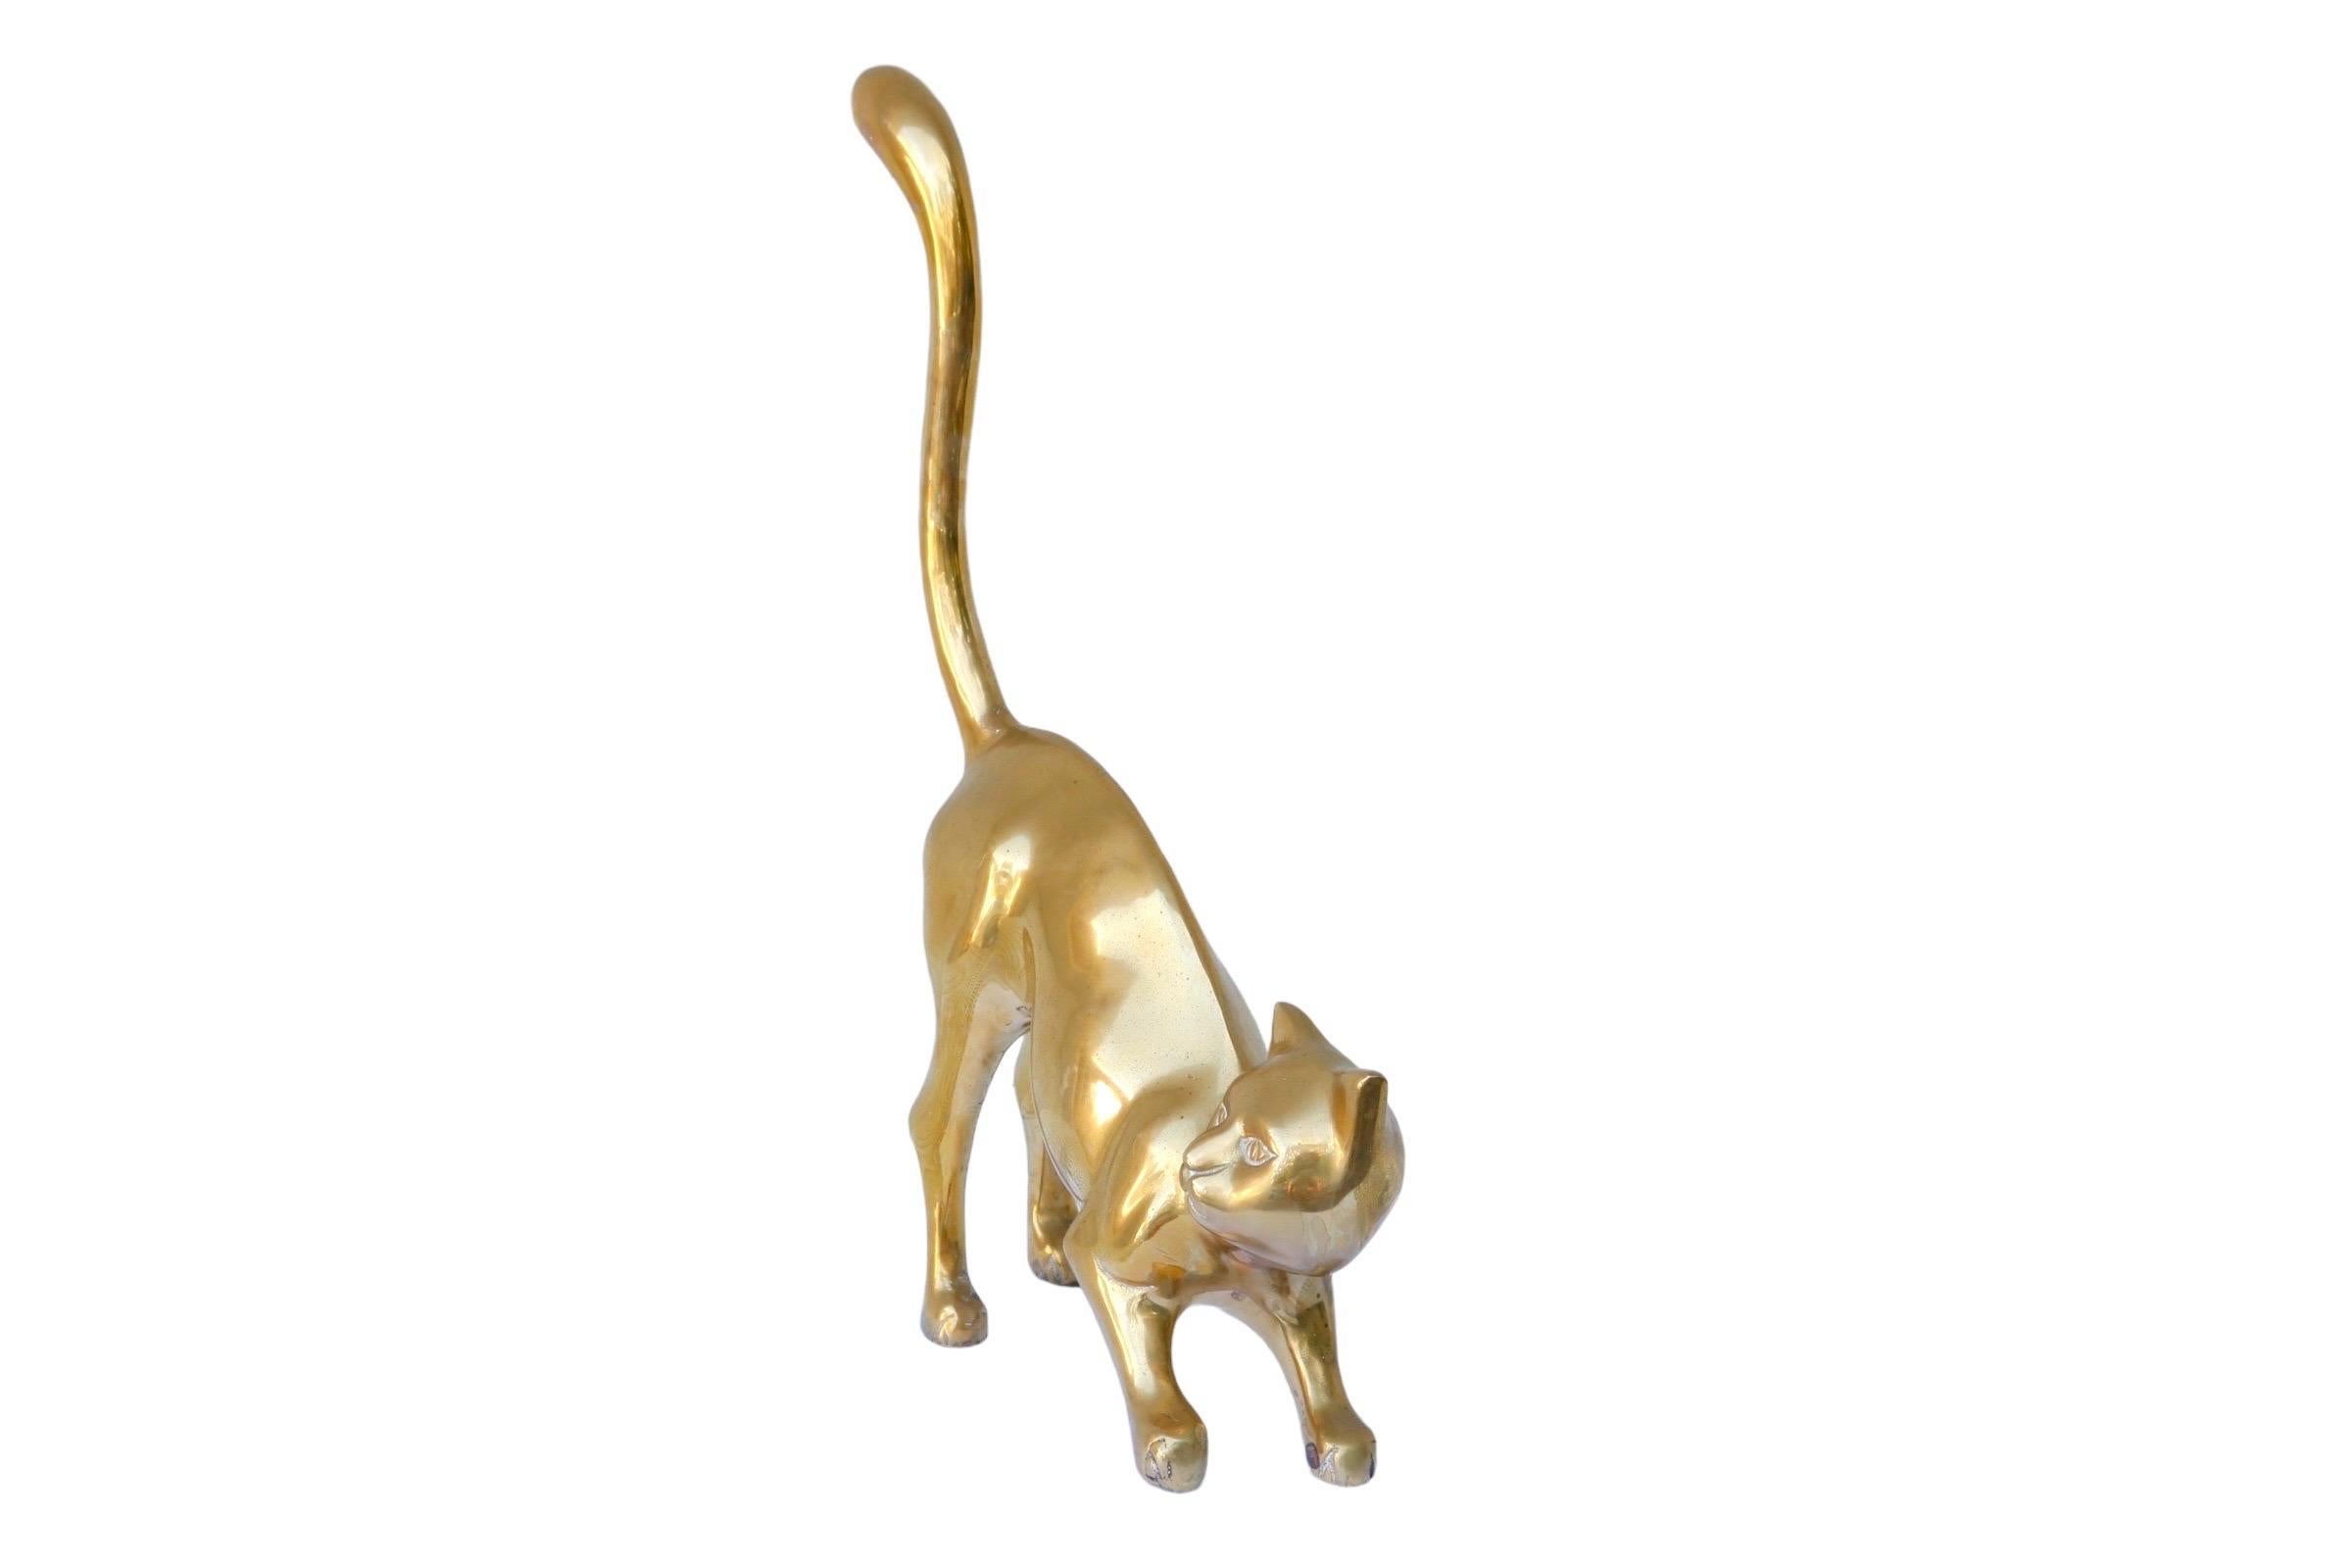 A modernist brass cat in a curious pose, with an unimpressed expression. Cast with fluid lines curved through the tail and arched back. Finished with simple lines detailing the eyes, nose, mouth and toes.